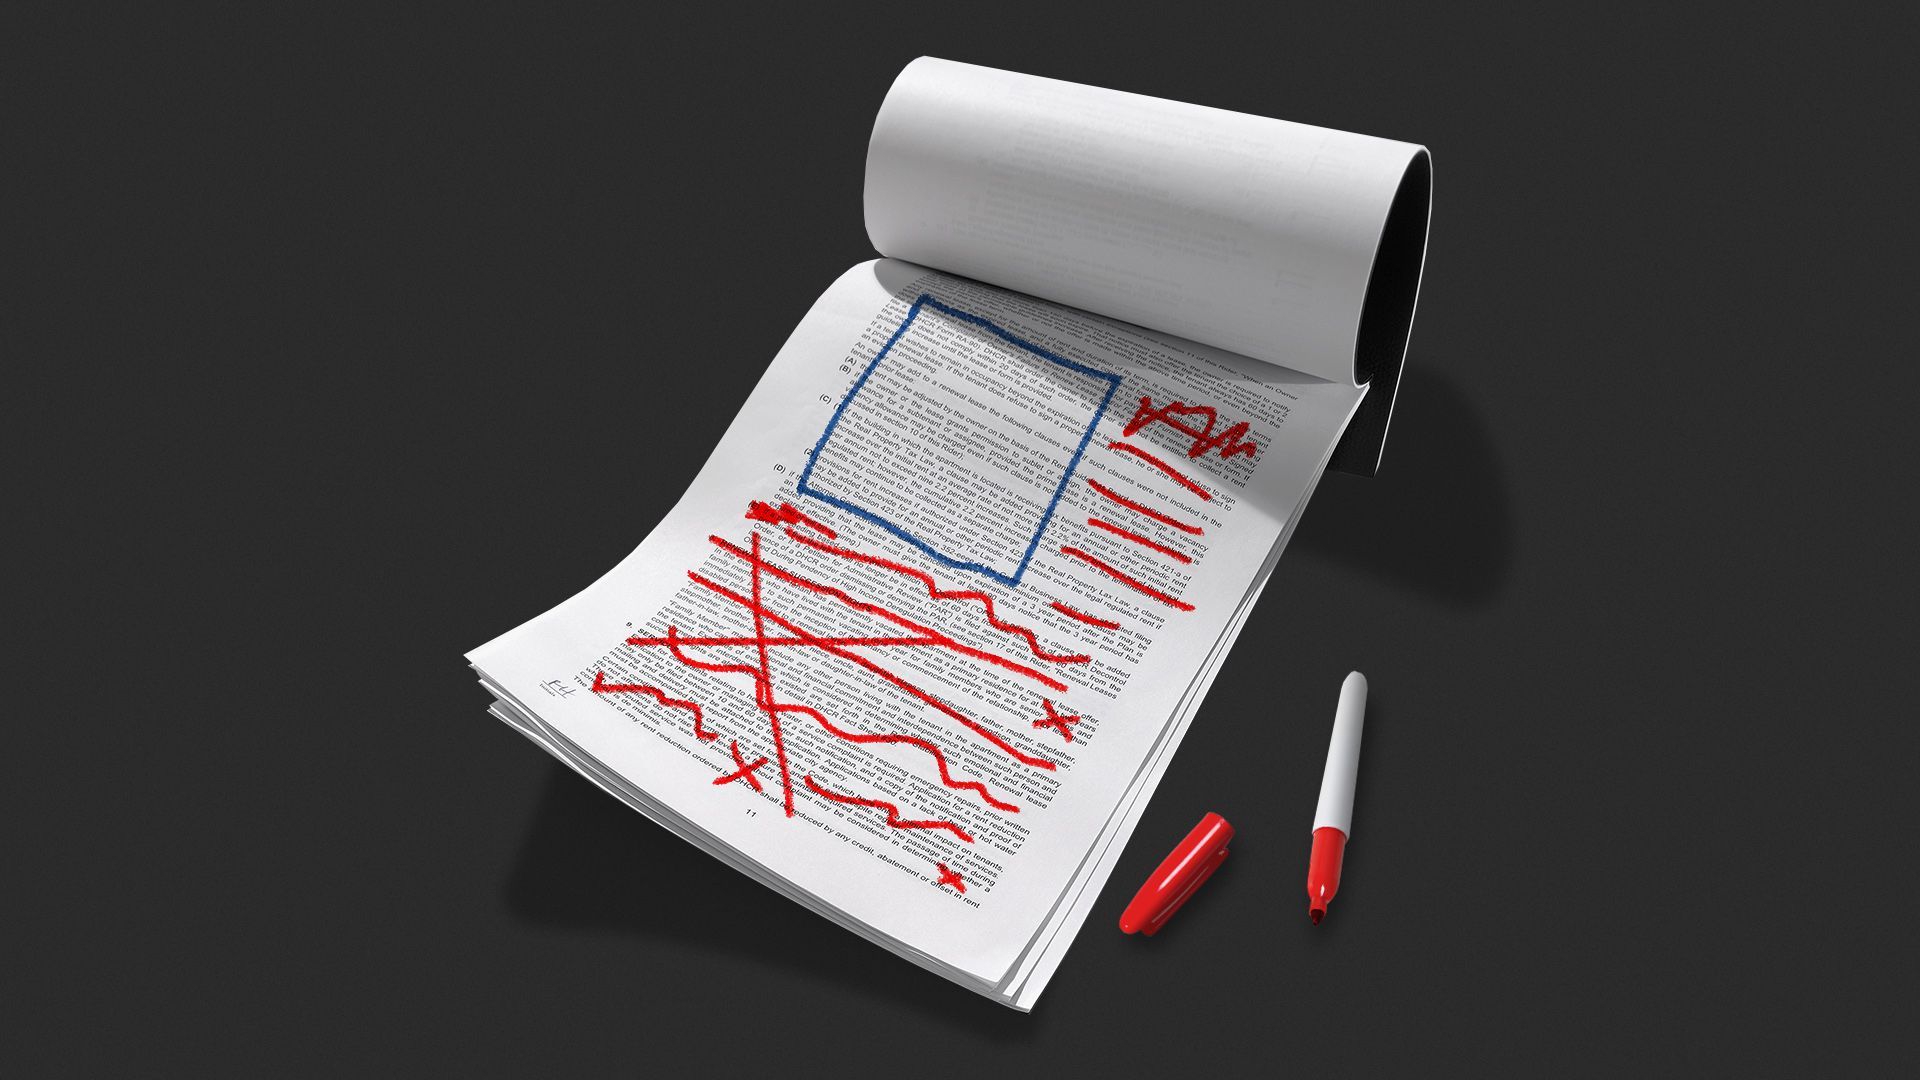 Illustration of a printed document with red and blue markings and scribbles resembling the U.S. flag